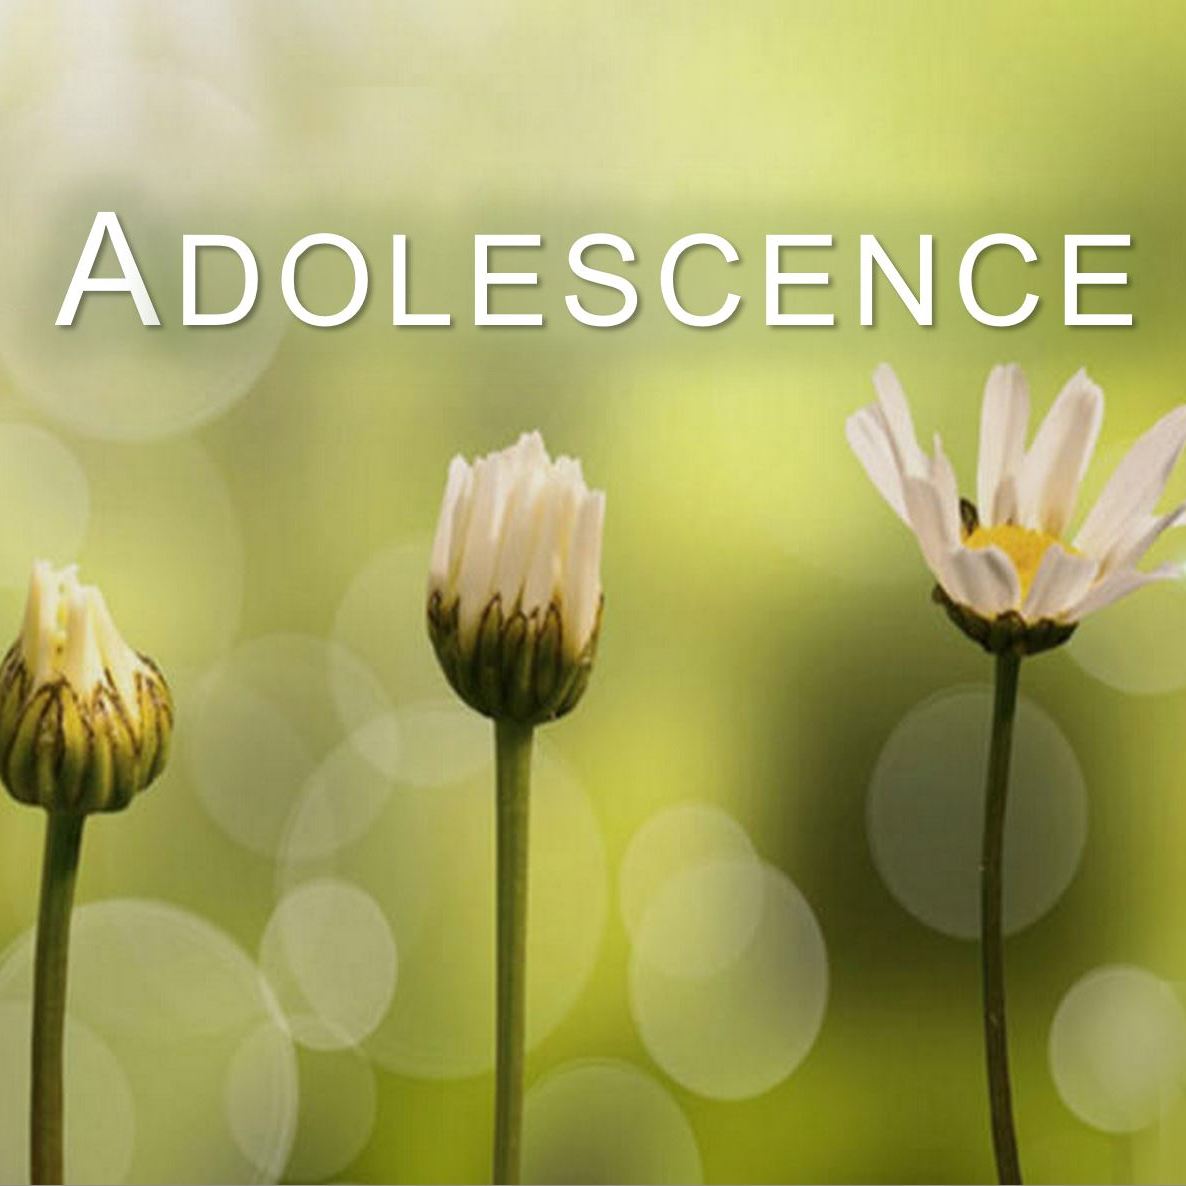 Adolescence | TE 563 | Dr Alok Pandey on the Science of Living